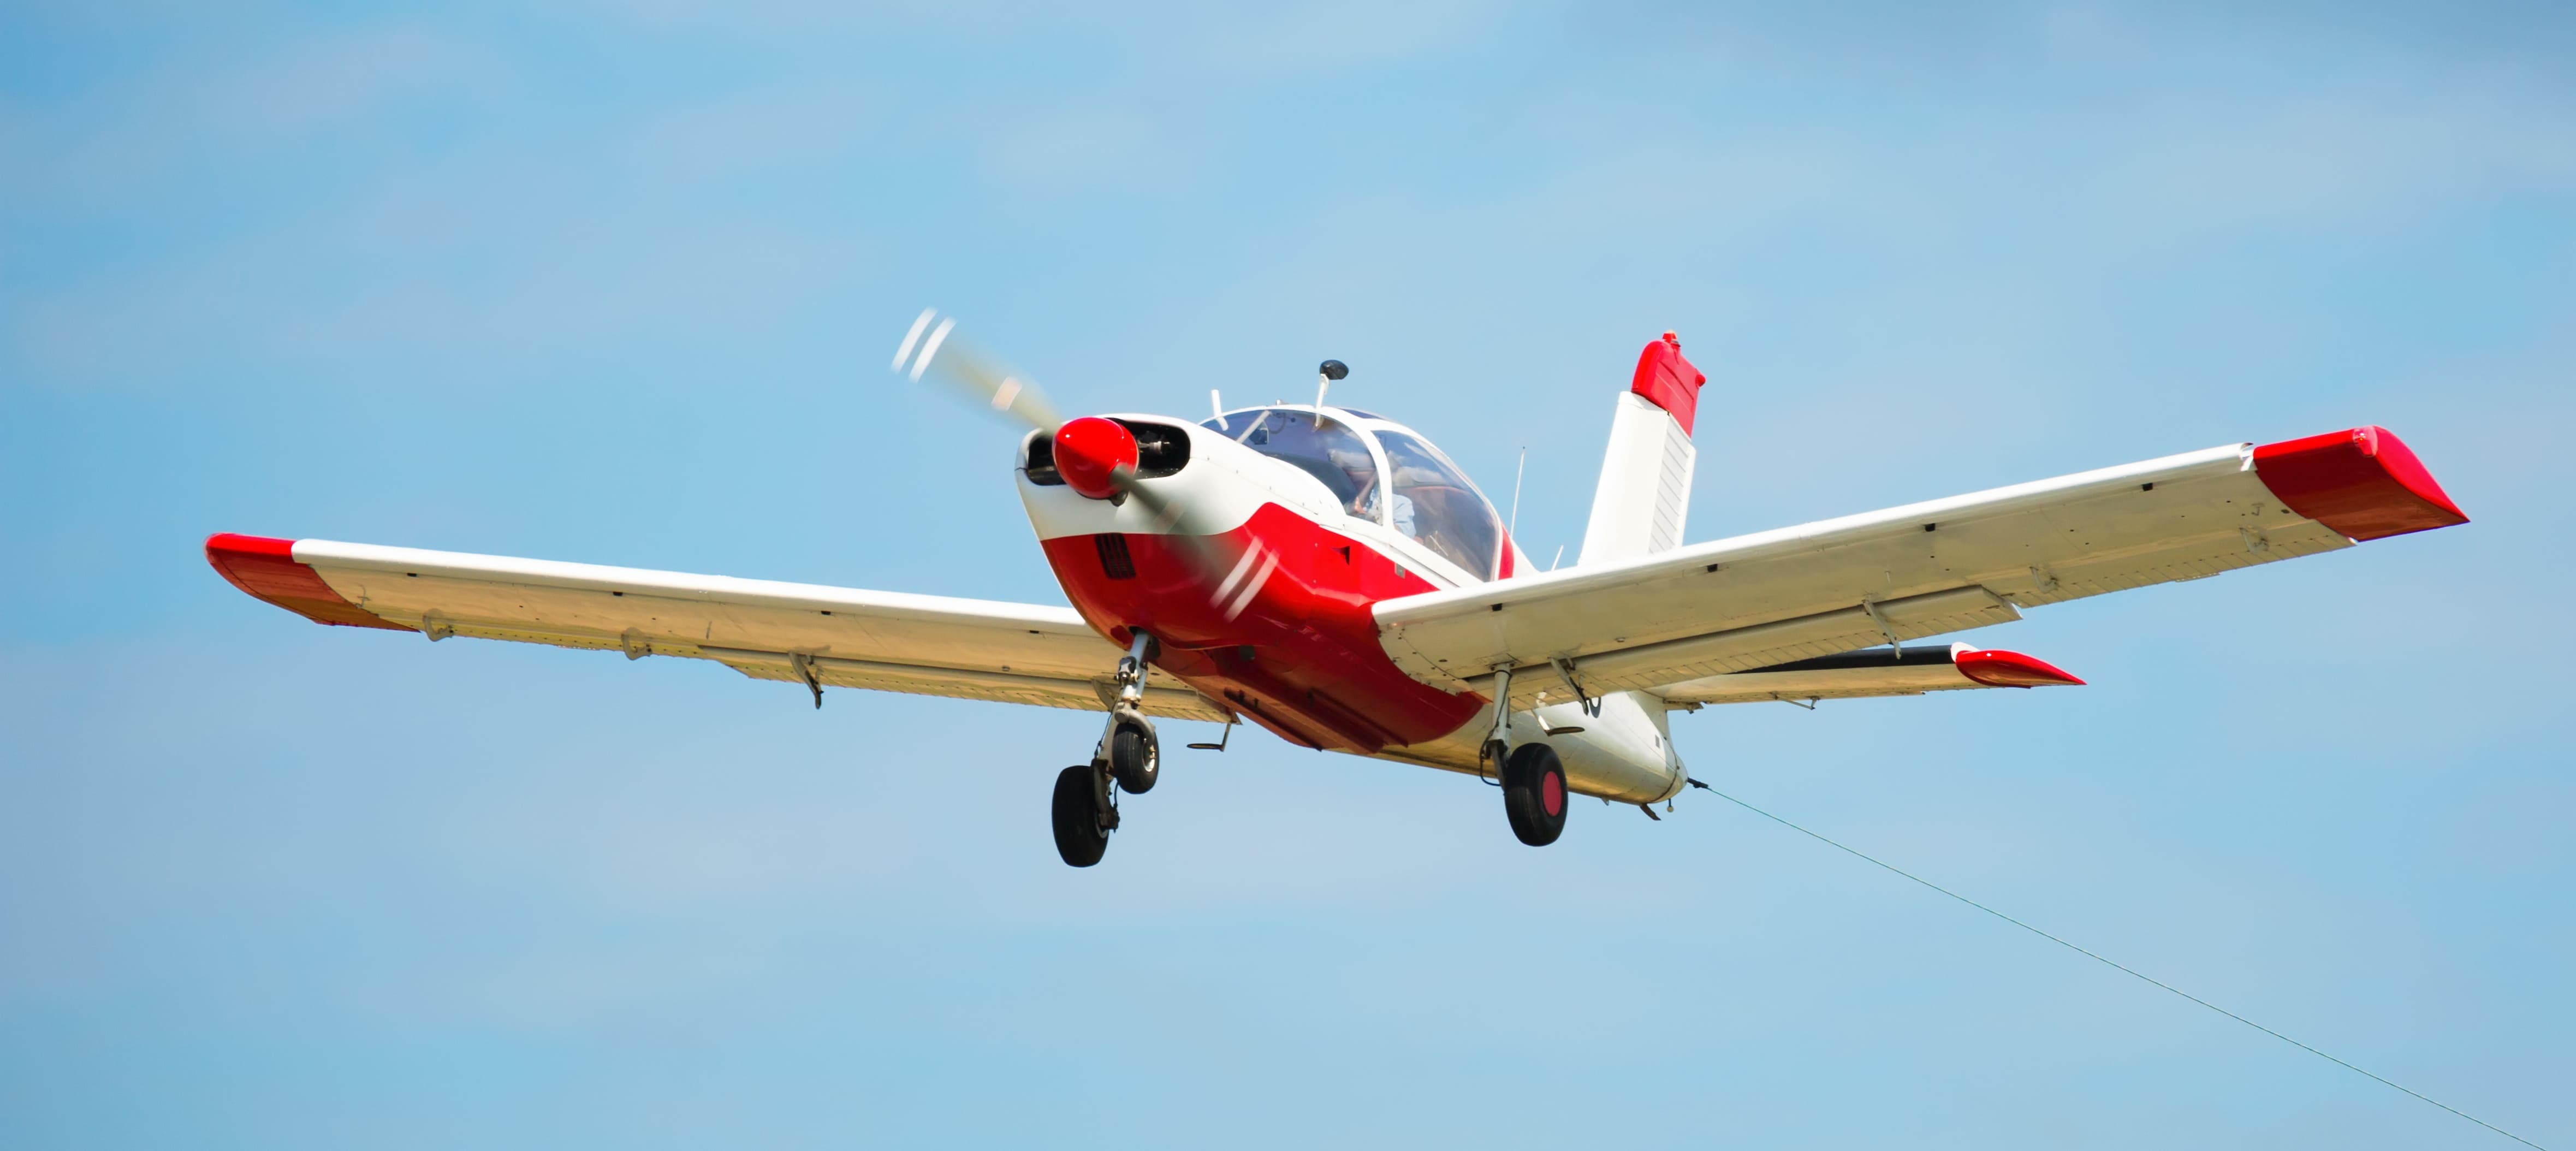 Image of small sports airplane hovering highly in the sky